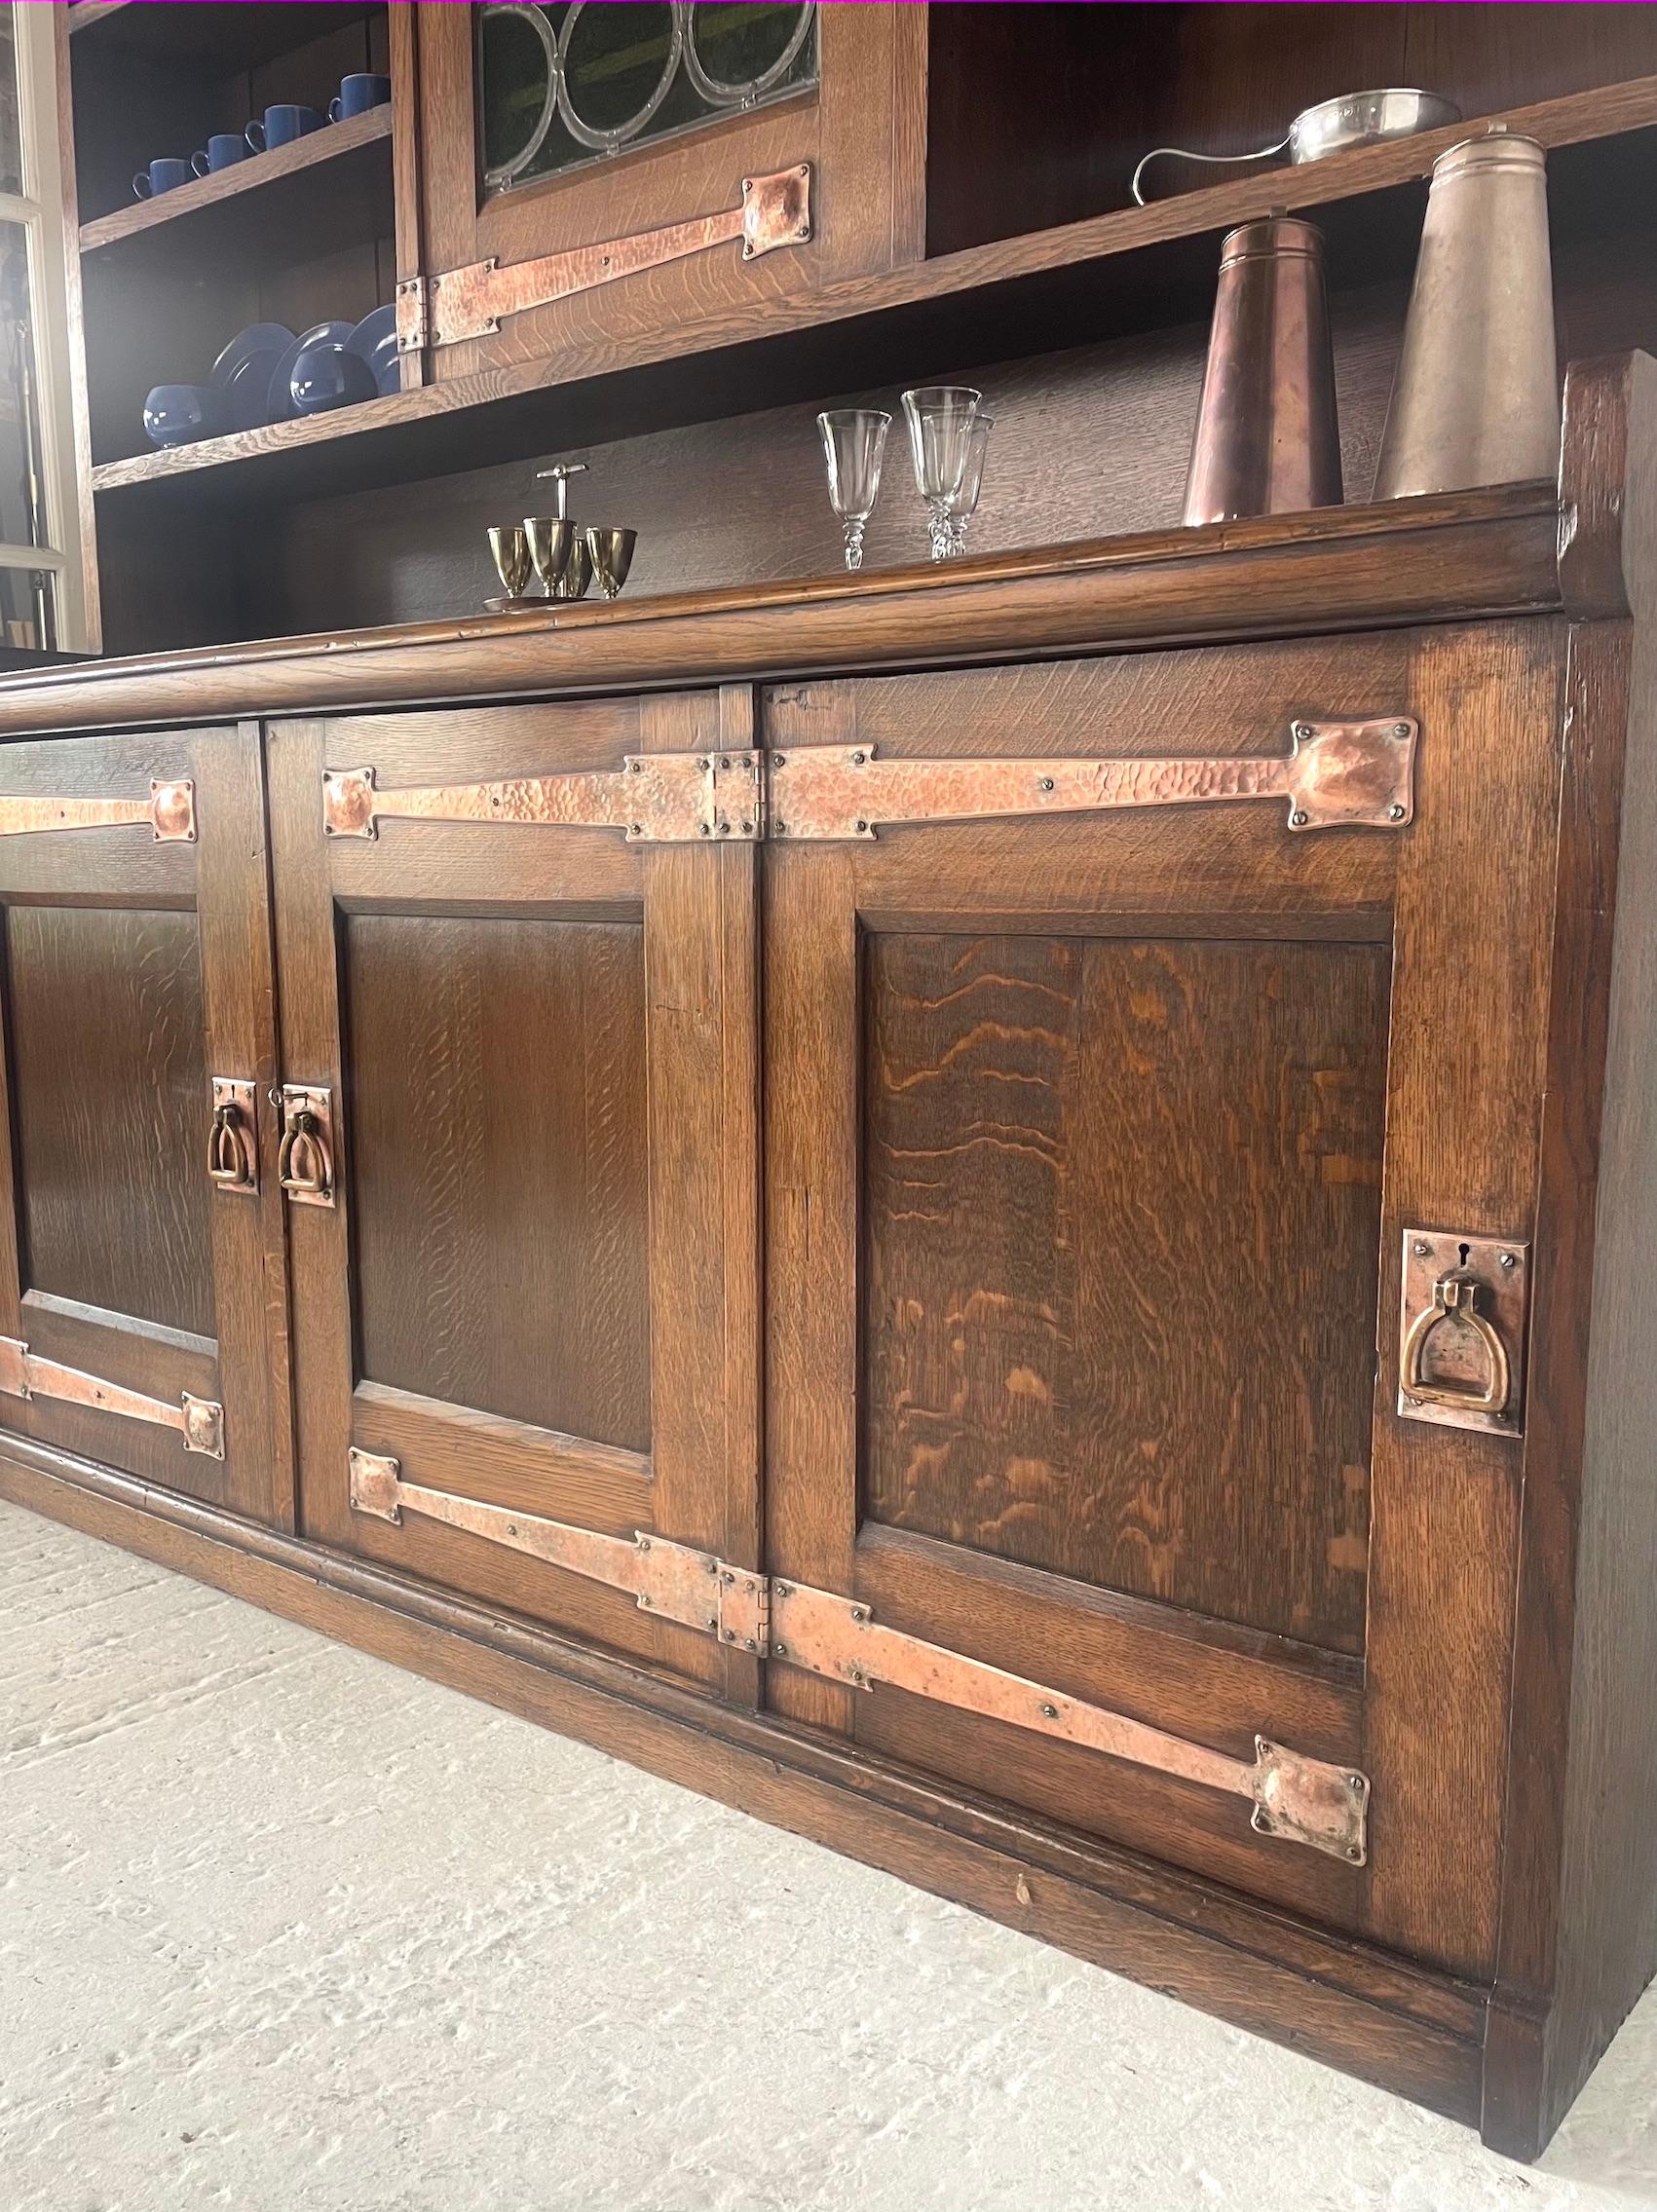 Arts & Crafts Dresser in quarter sawn oak
Stylised copper strap hinges
Copper stirrup handles
Leaded textured green glass panel to the central door
Three doors below
Adjustable shelving
Attributed to the studio of Leonard Wyburd
Liberty & Co
Circa